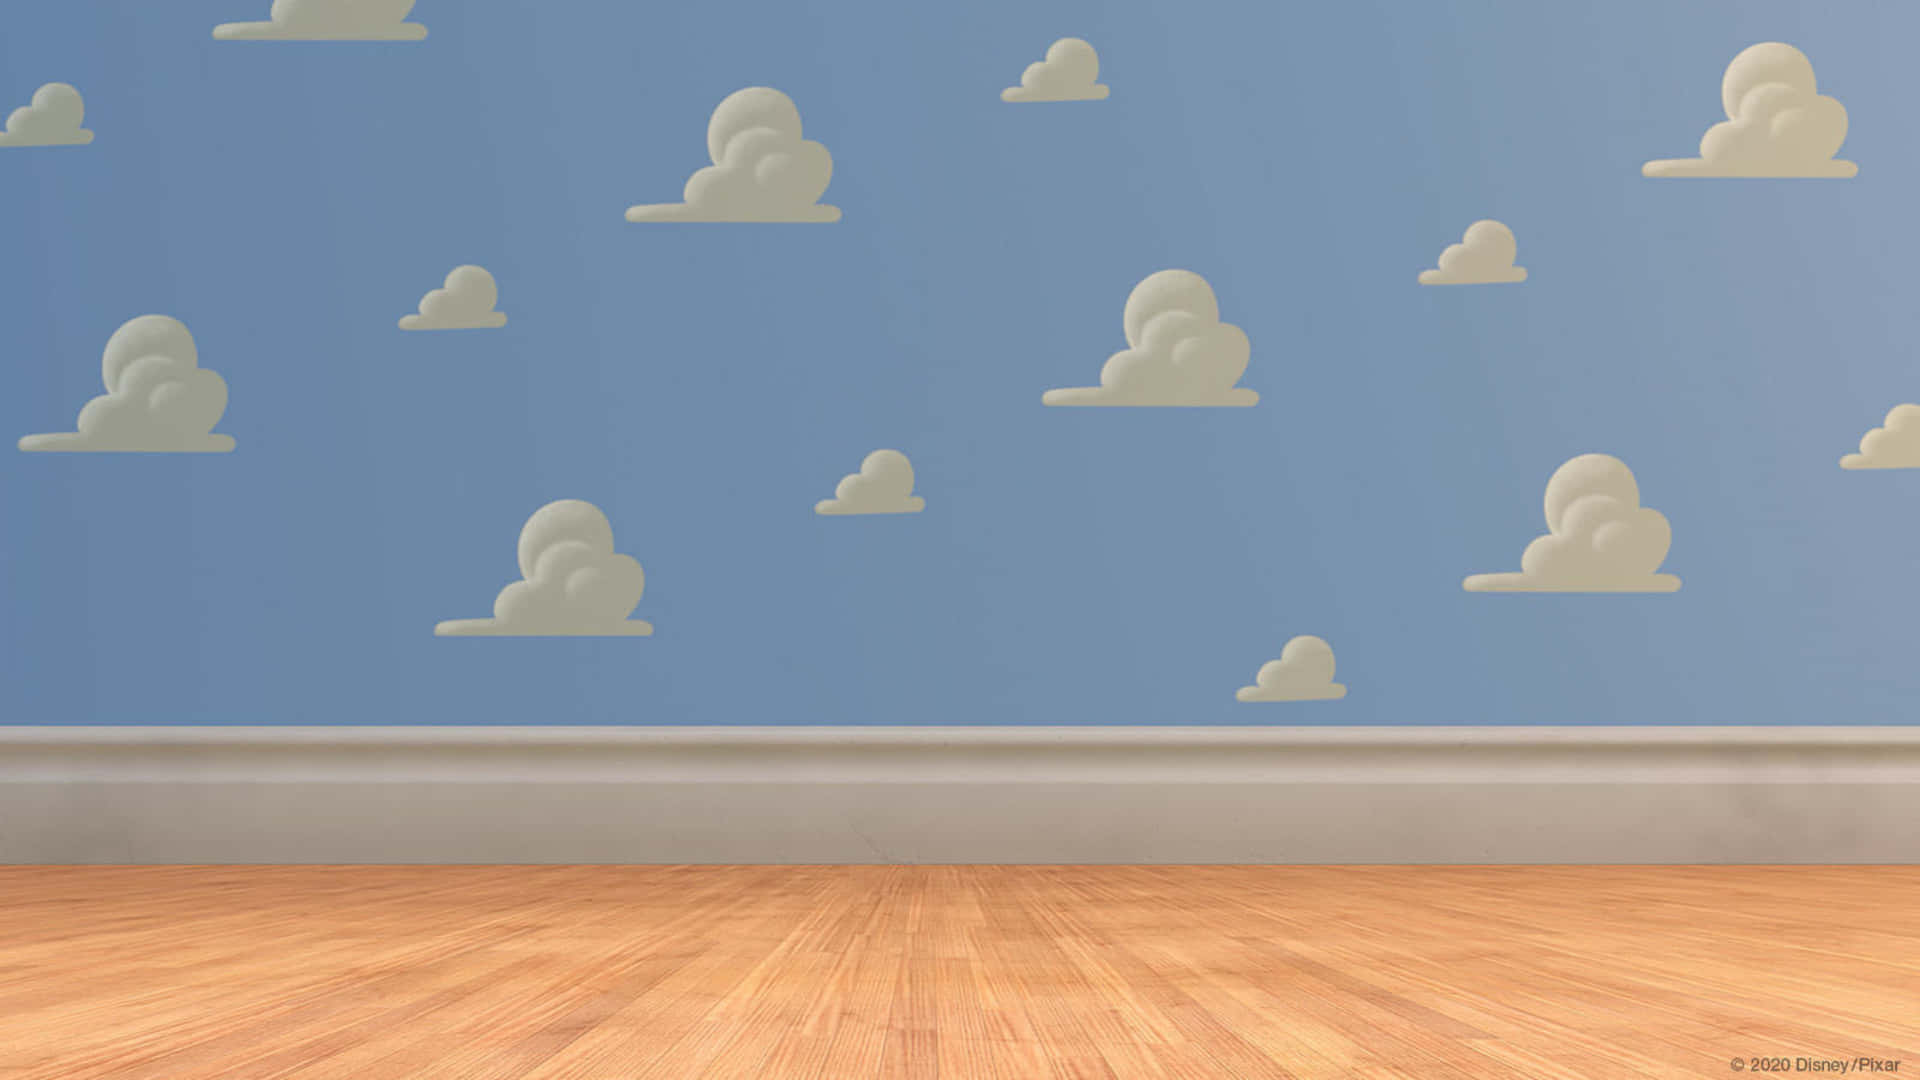 A Room With A Blue Wall And Clouds On It